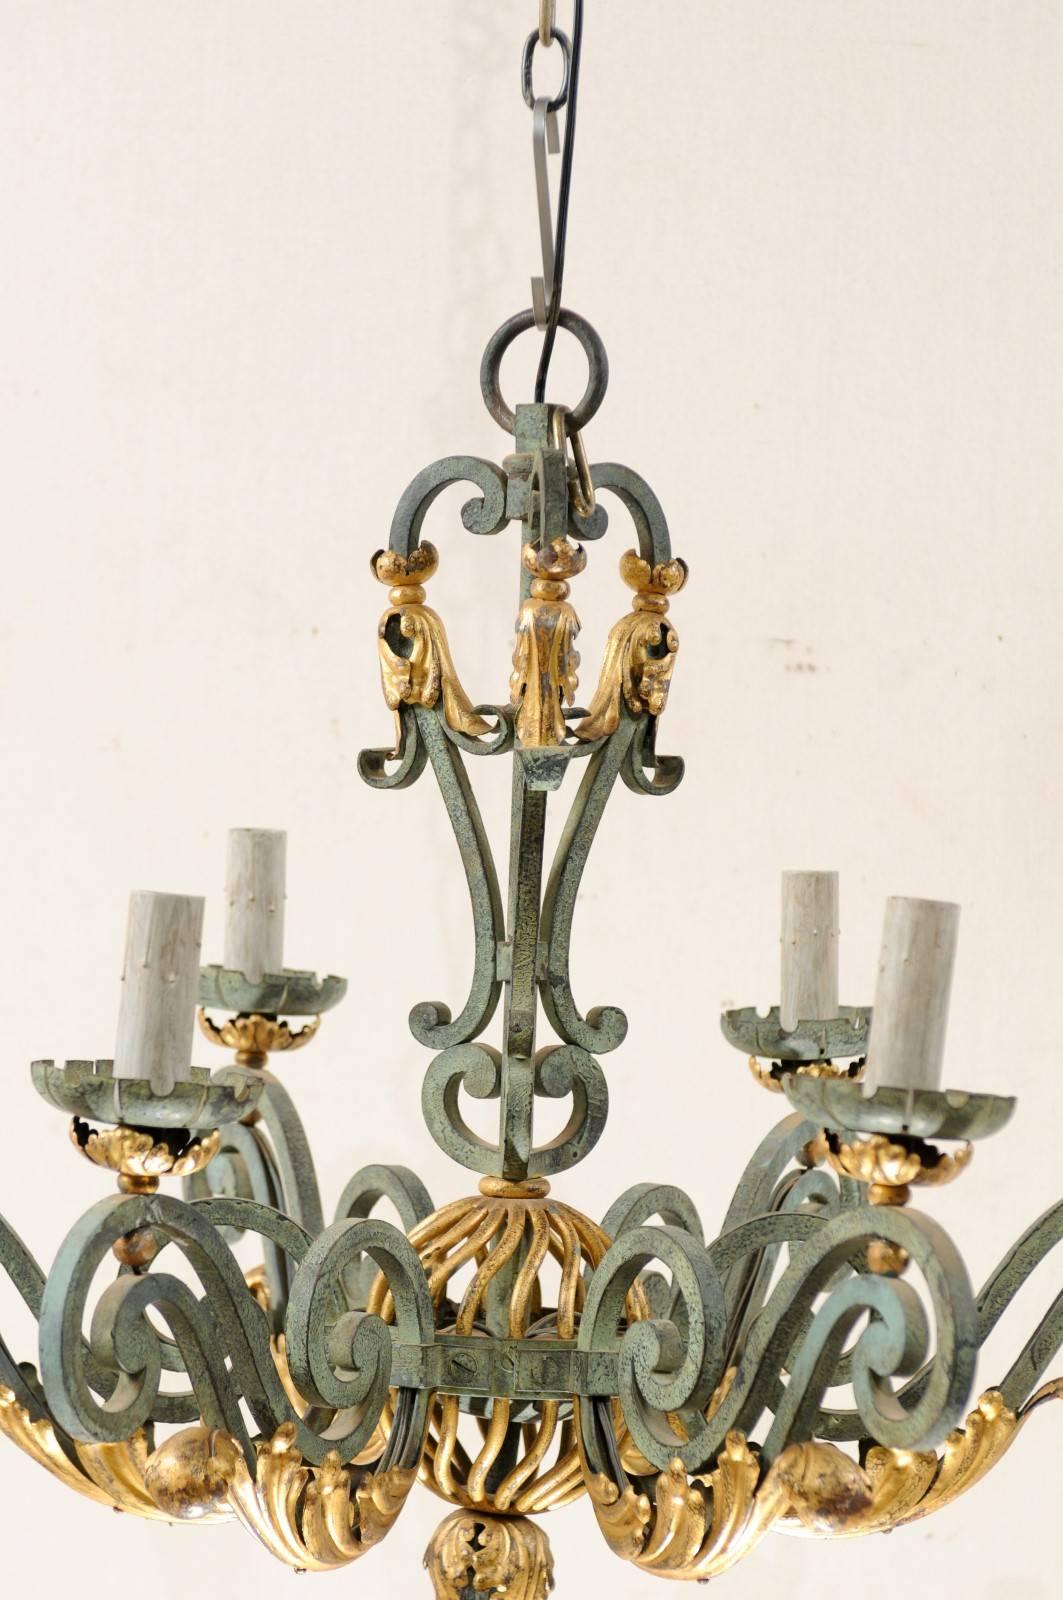 Elegant French Verdigris Six-Light Chandelier of Forged Iron with Gilt Accent In Good Condition For Sale In Atlanta, GA